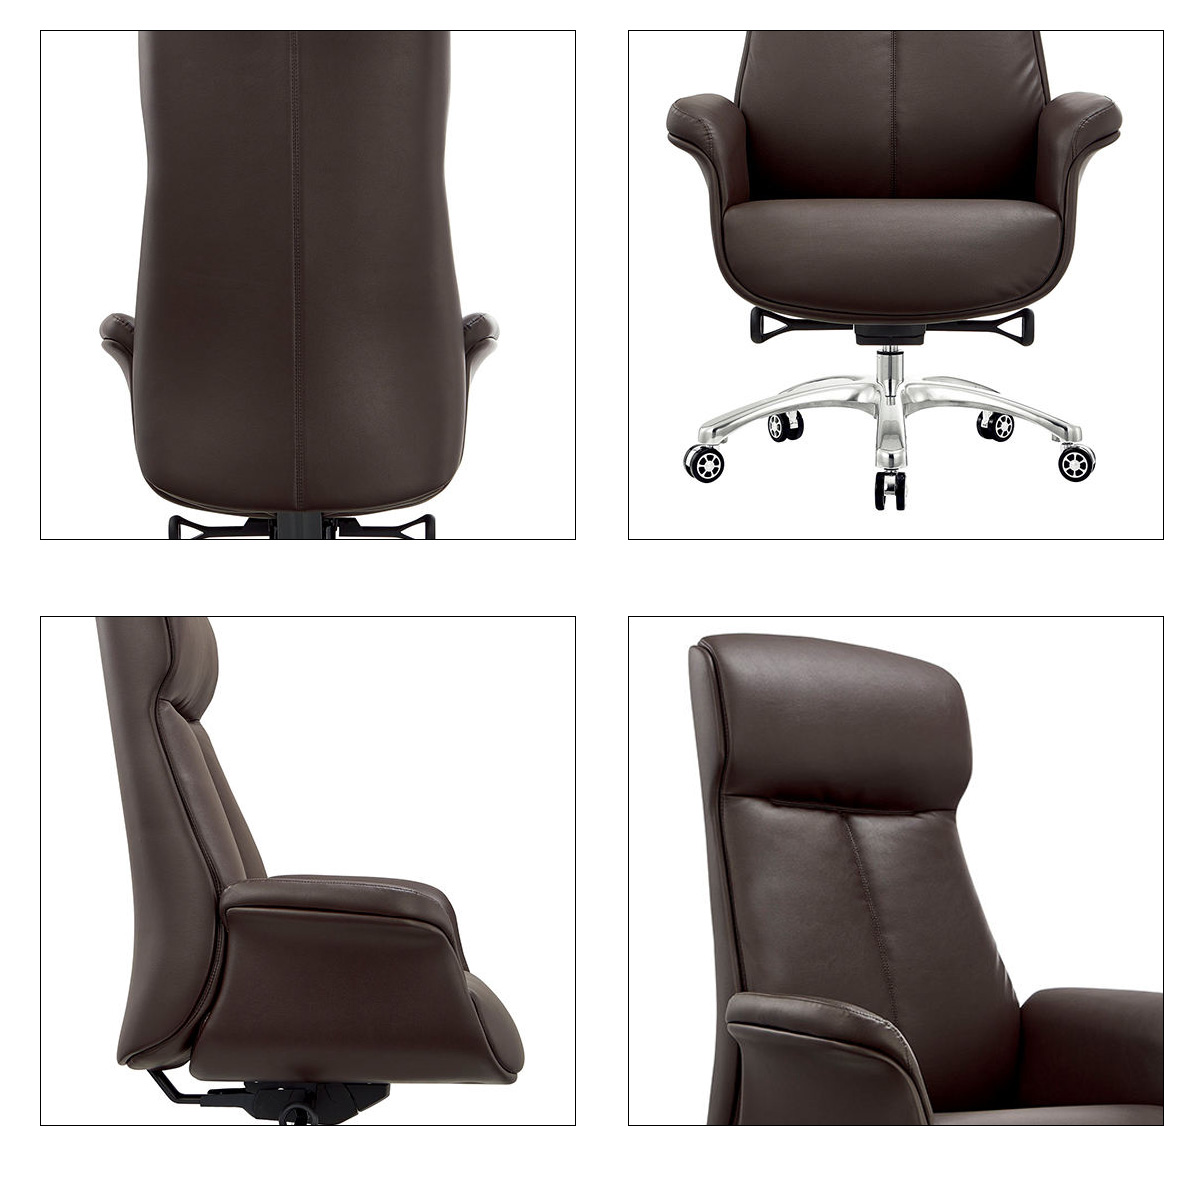  Luksus Executive Office Chair 